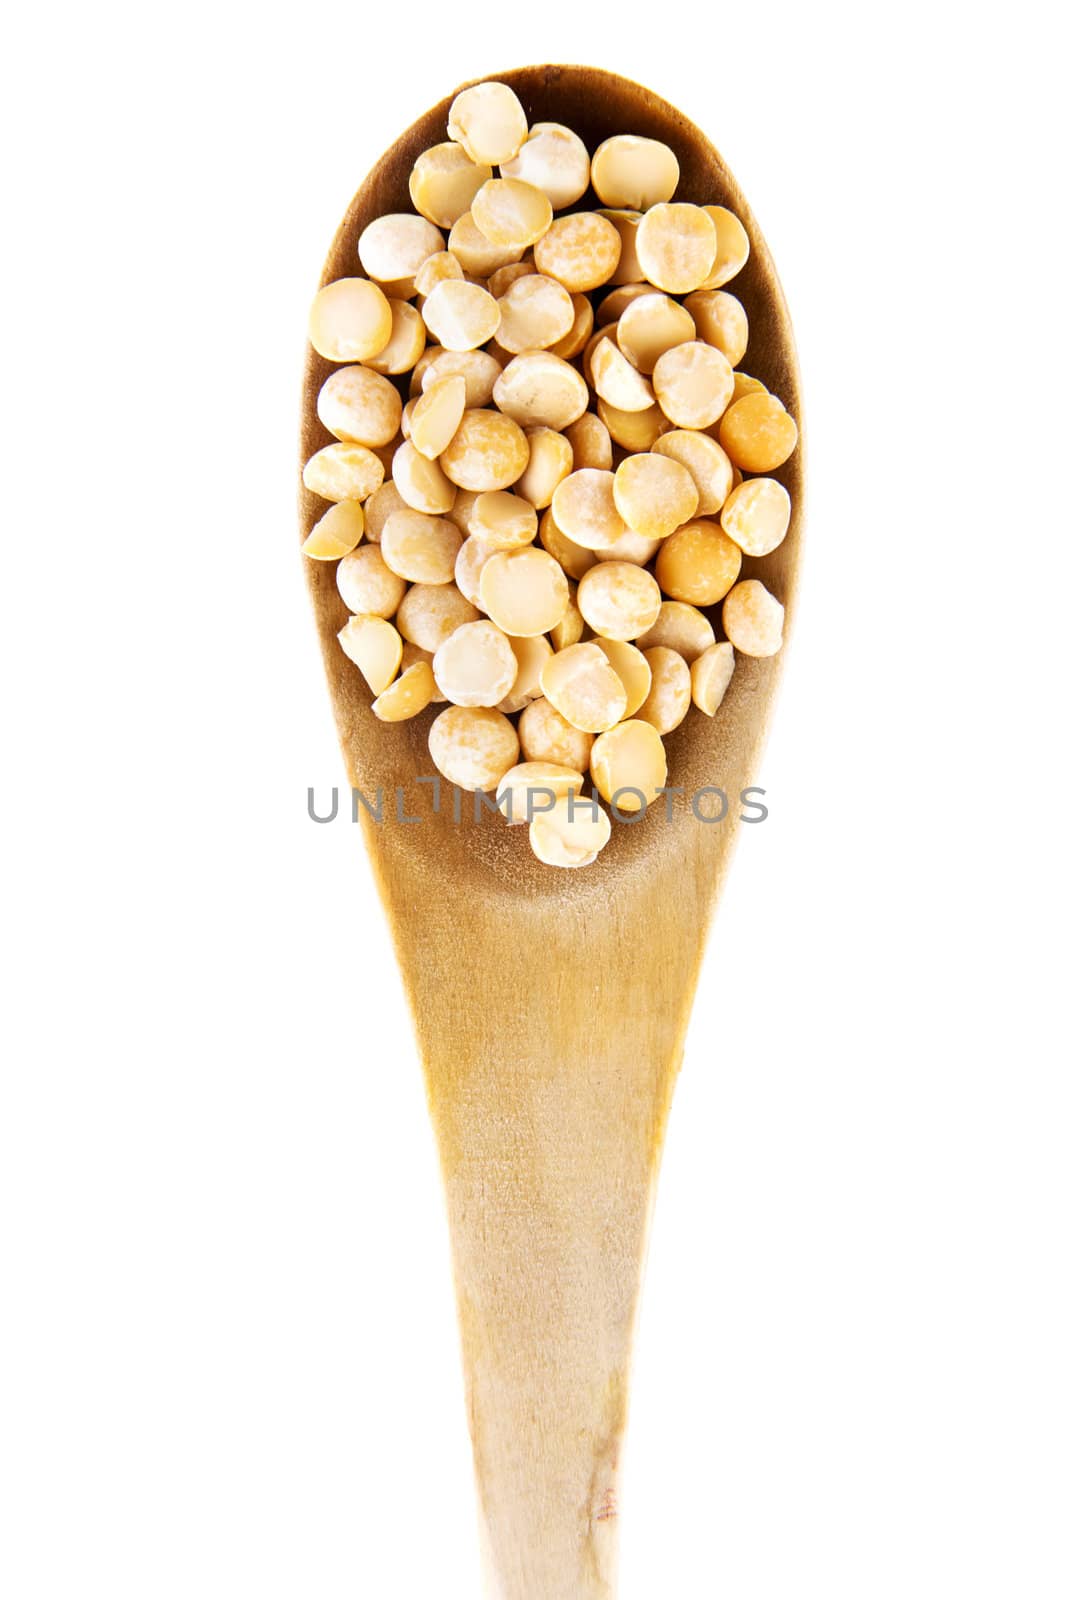 Dry peas on wooden spoon by BDS